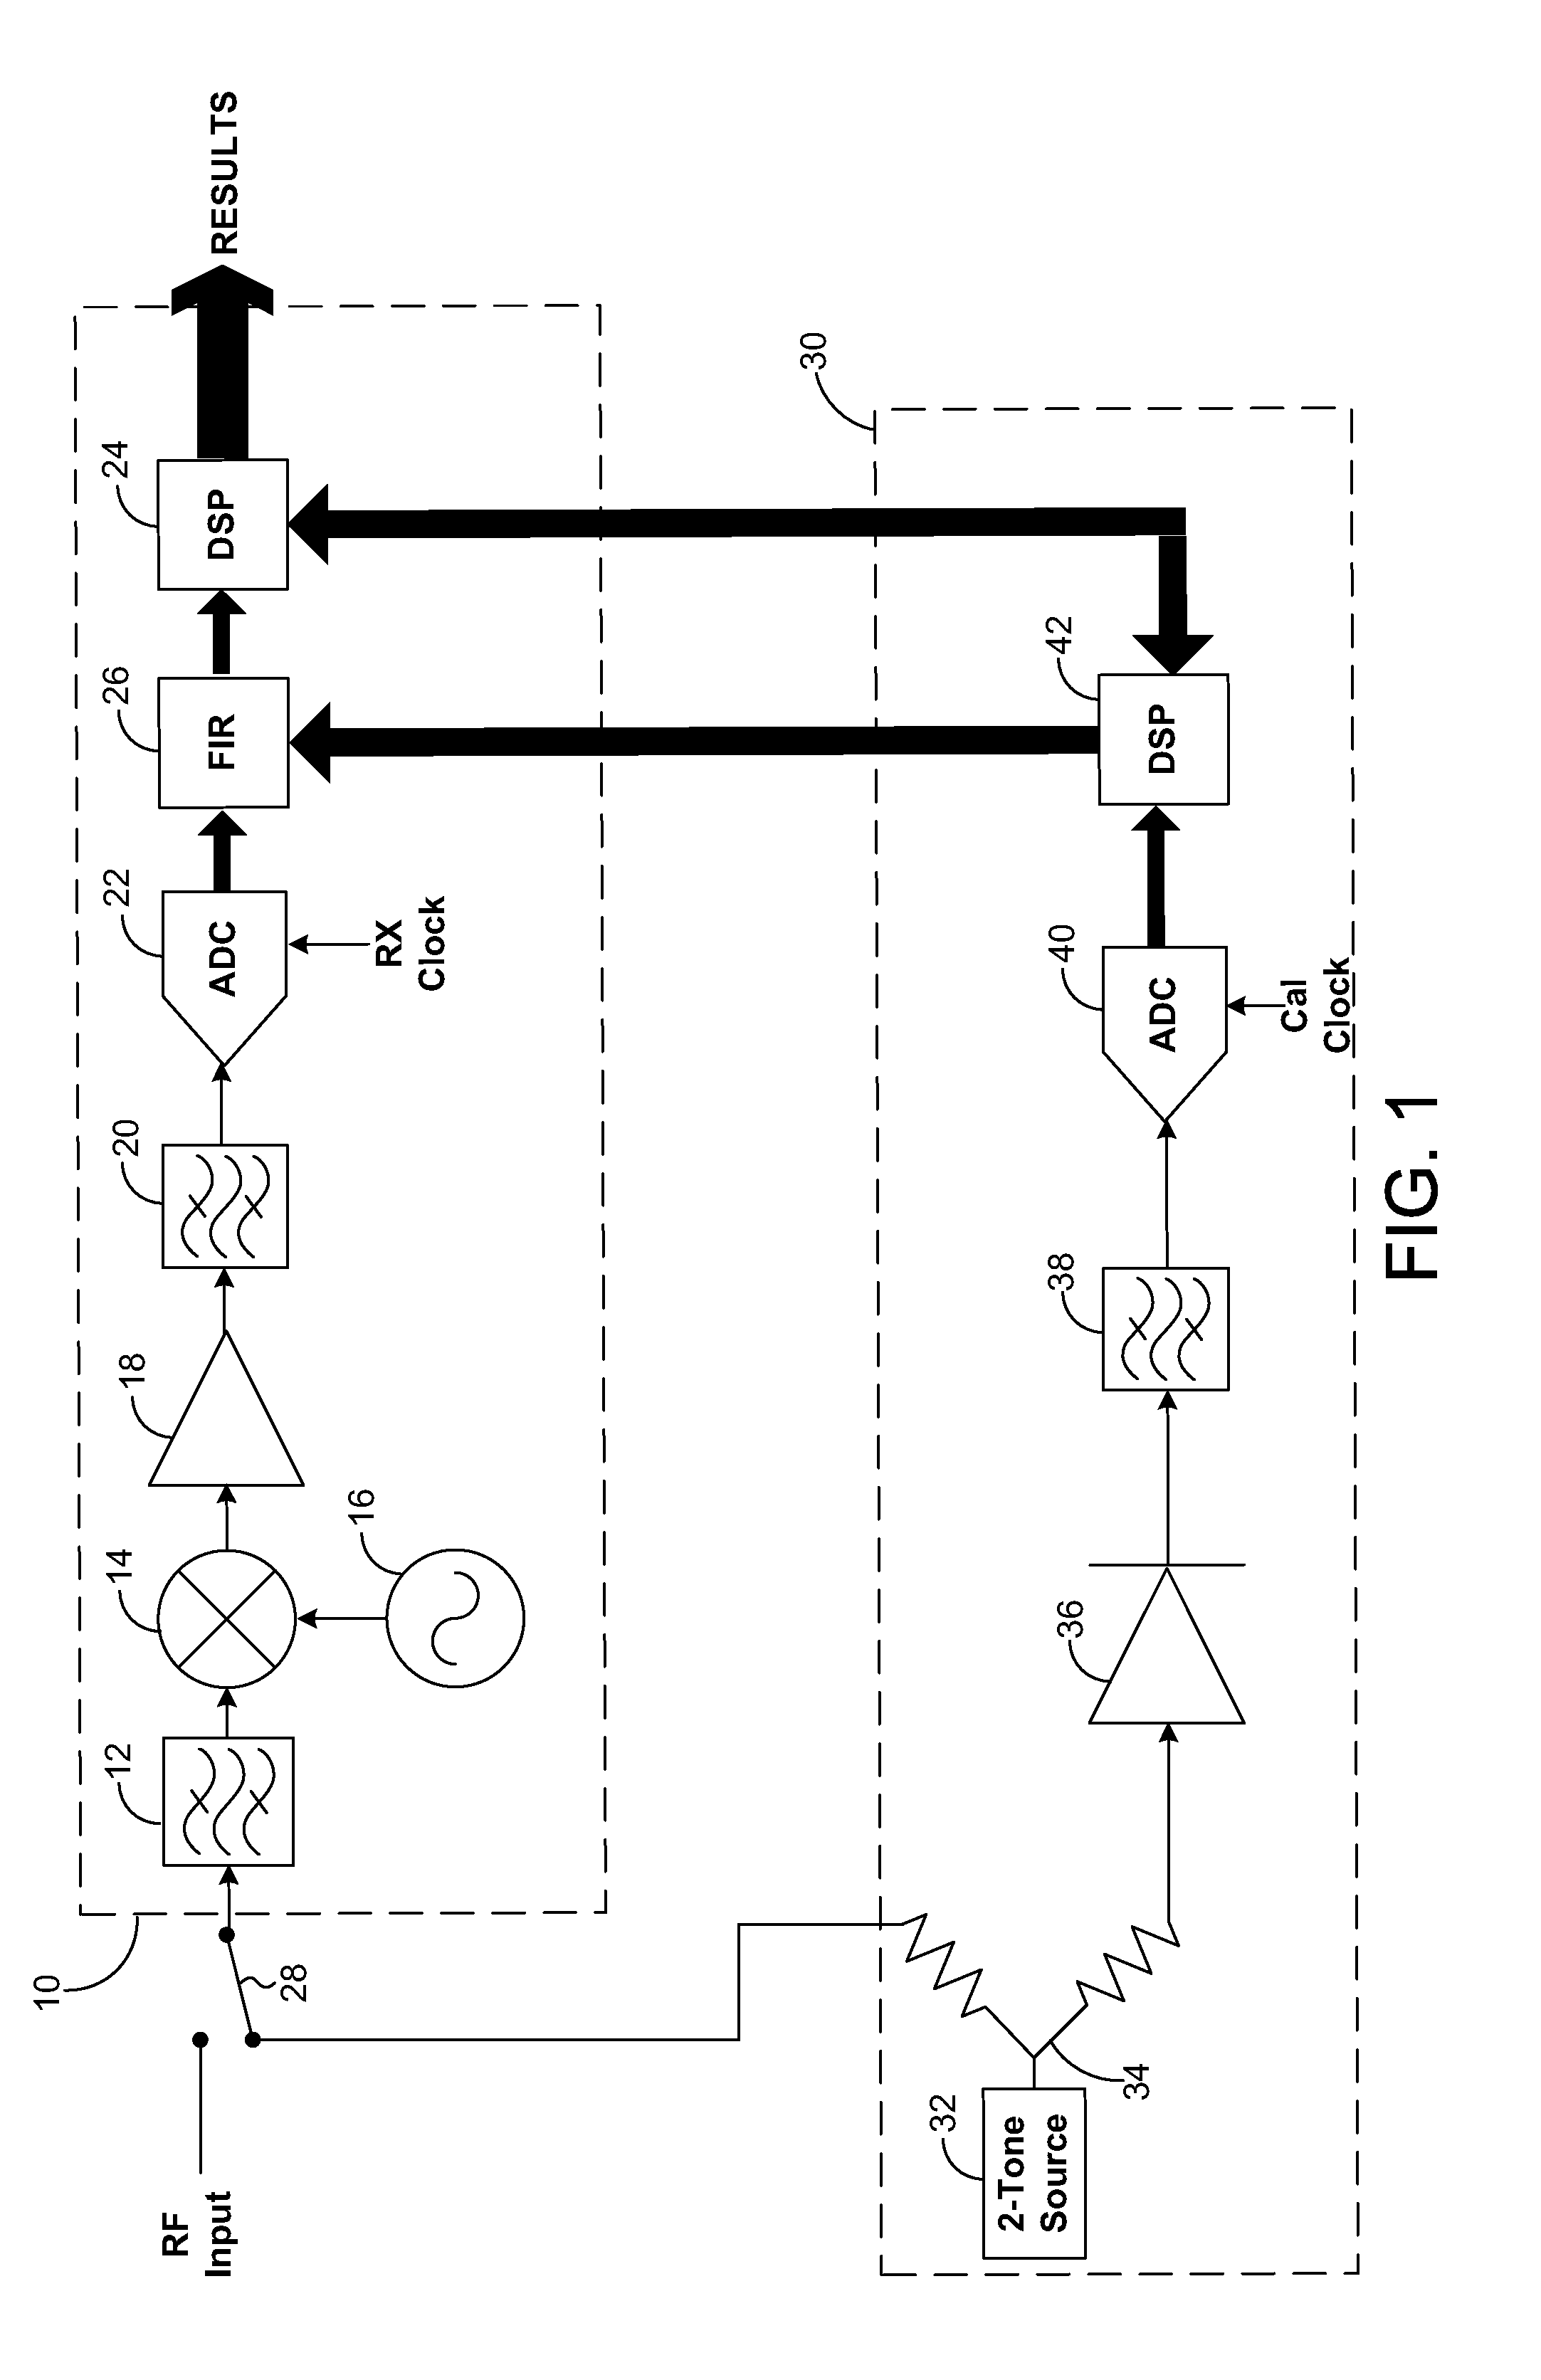 Magnitude and phase response calibration of receivers